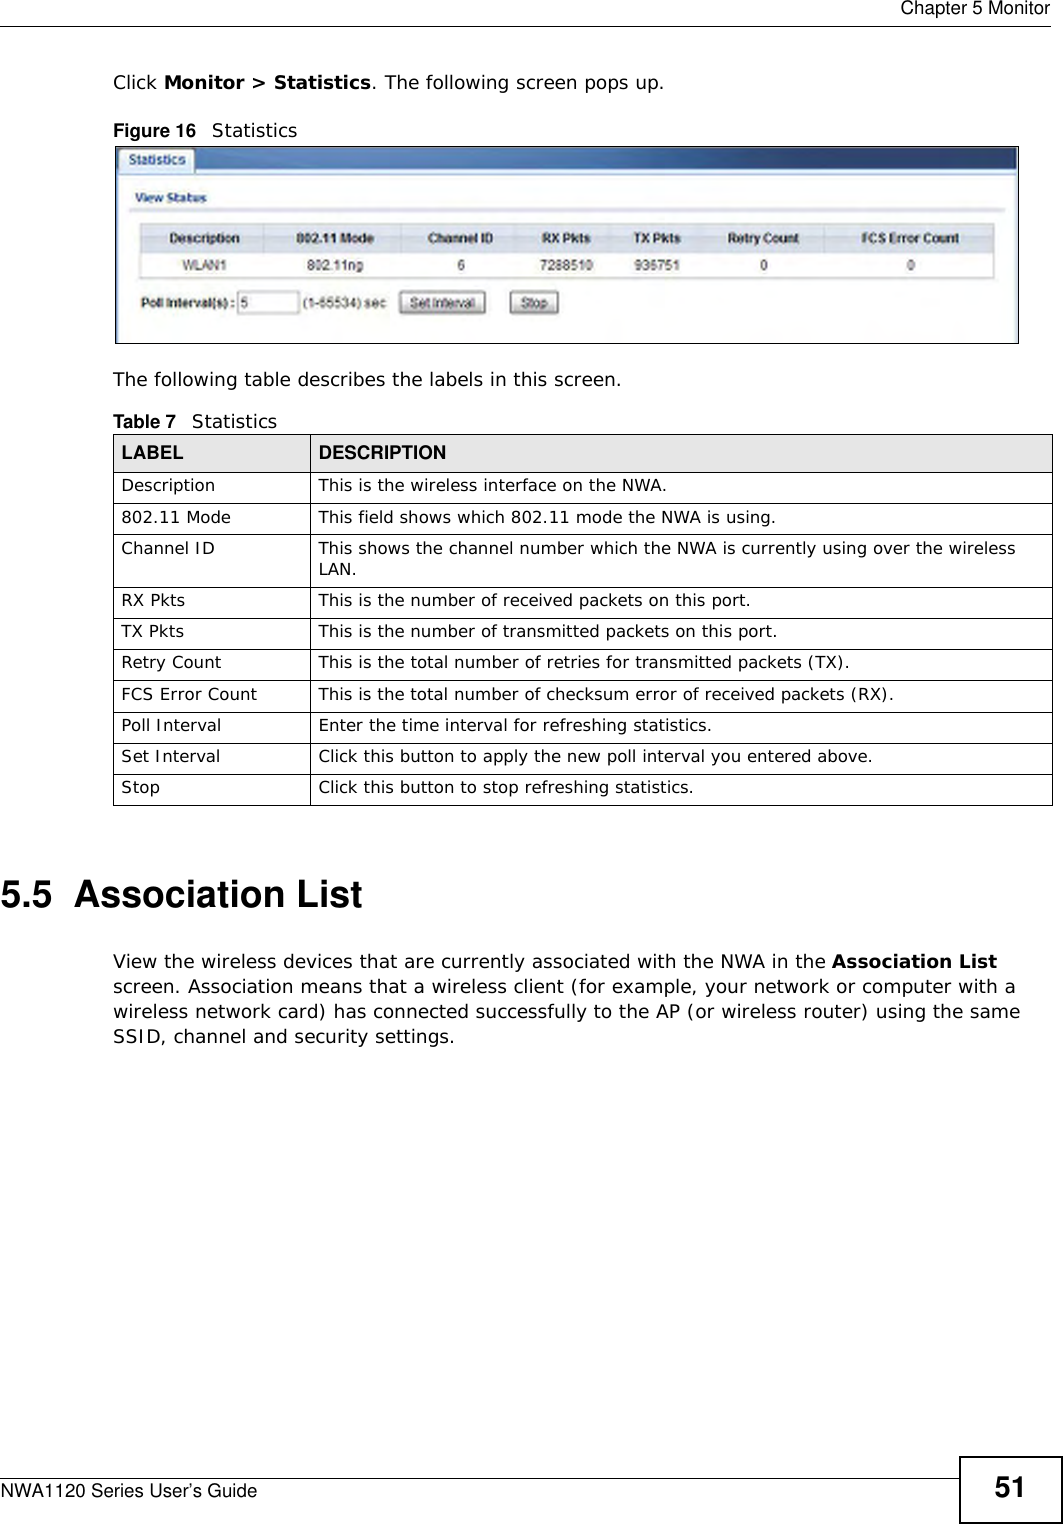  Chapter 5 MonitorNWA1120 Series User’s Guide 51Click Monitor &gt; Statistics. The following screen pops up.Figure 16   StatisticsThe following table describes the labels in this screen.5.5  Association ListView the wireless devices that are currently associated with the NWA in the Association List screen. Association means that a wireless client (for example, your network or computer with a wireless network card) has connected successfully to the AP (or wireless router) using the same SSID, channel and security settings.Table 7   StatisticsLABEL DESCRIPTIONDescription This is the wireless interface on the NWA. 802.11 Mode This field shows which 802.11 mode the NWA is using.Channel ID This shows the channel number which the NWA is currently using over the wireless LAN. RX Pkts This is the number of received packets on this port.TX Pkts This is the number of transmitted packets on this port.Retry Count This is the total number of retries for transmitted packets (TX).FCS Error Count This is the total number of checksum error of received packets (RX).Poll Interval Enter the time interval for refreshing statistics.Set Interval Click this button to apply the new poll interval you entered above.Stop Click this button to stop refreshing statistics.